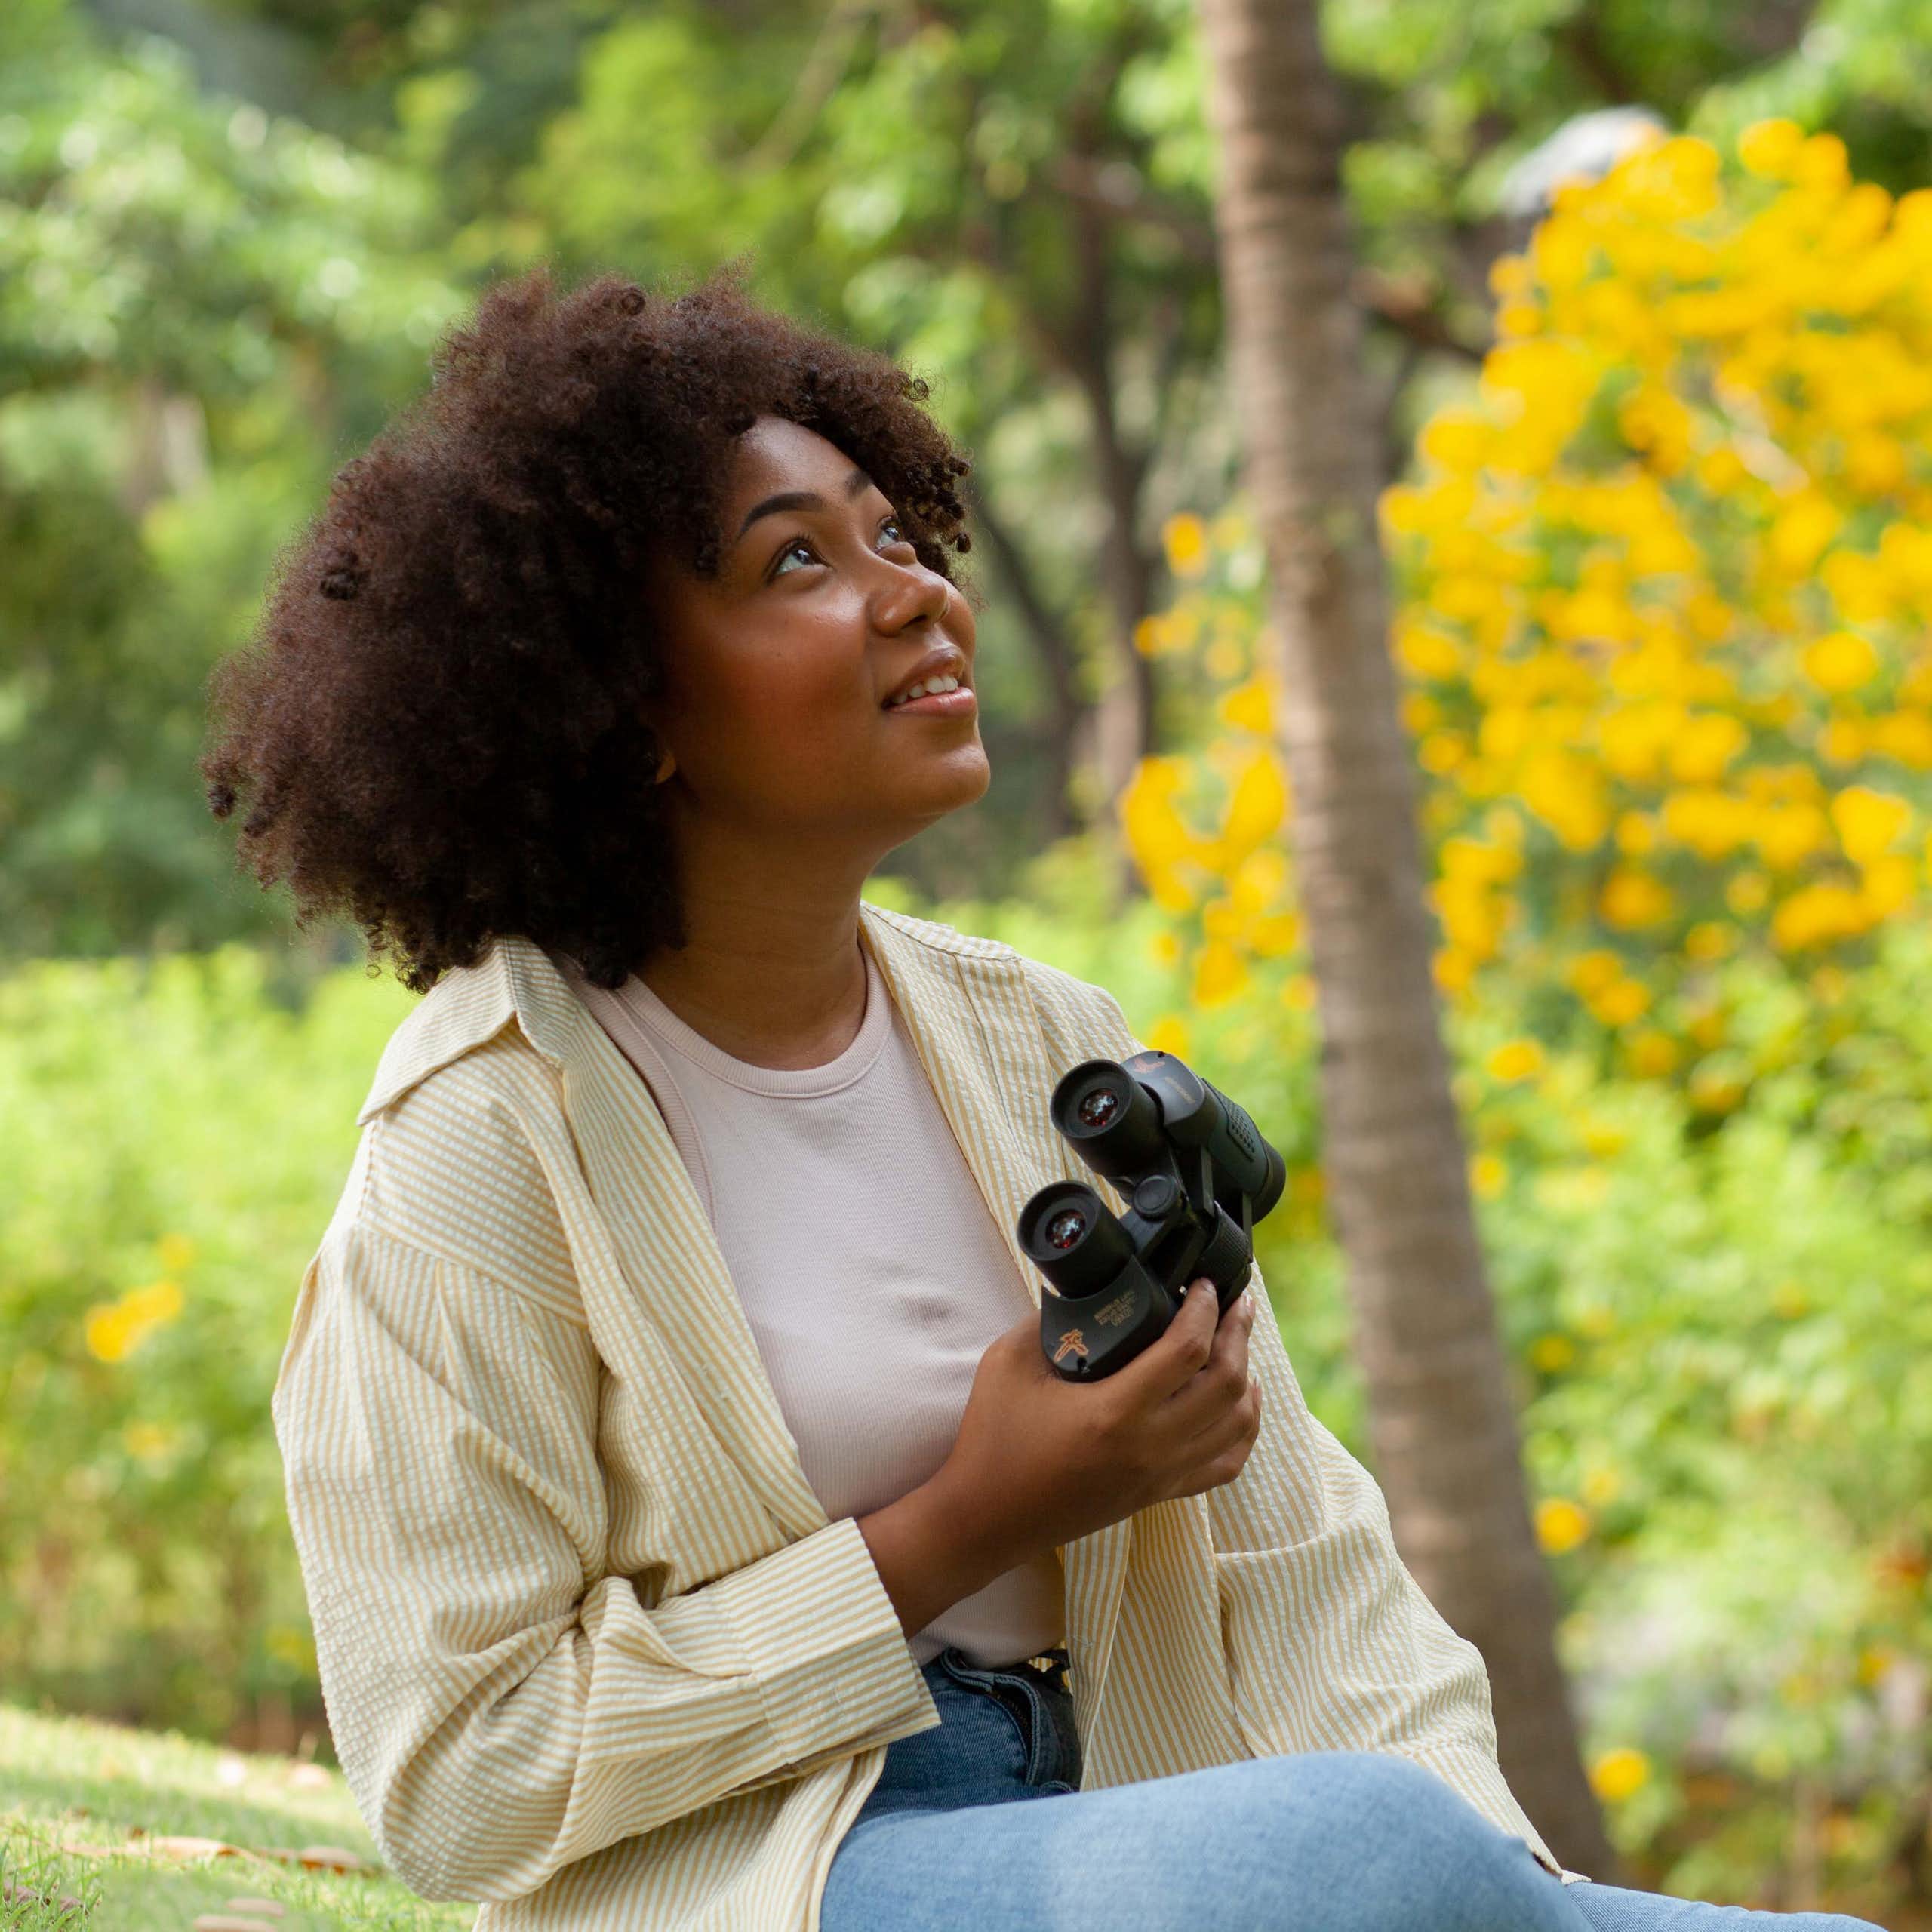 Woman holds binoculars and smiles while birdwatching